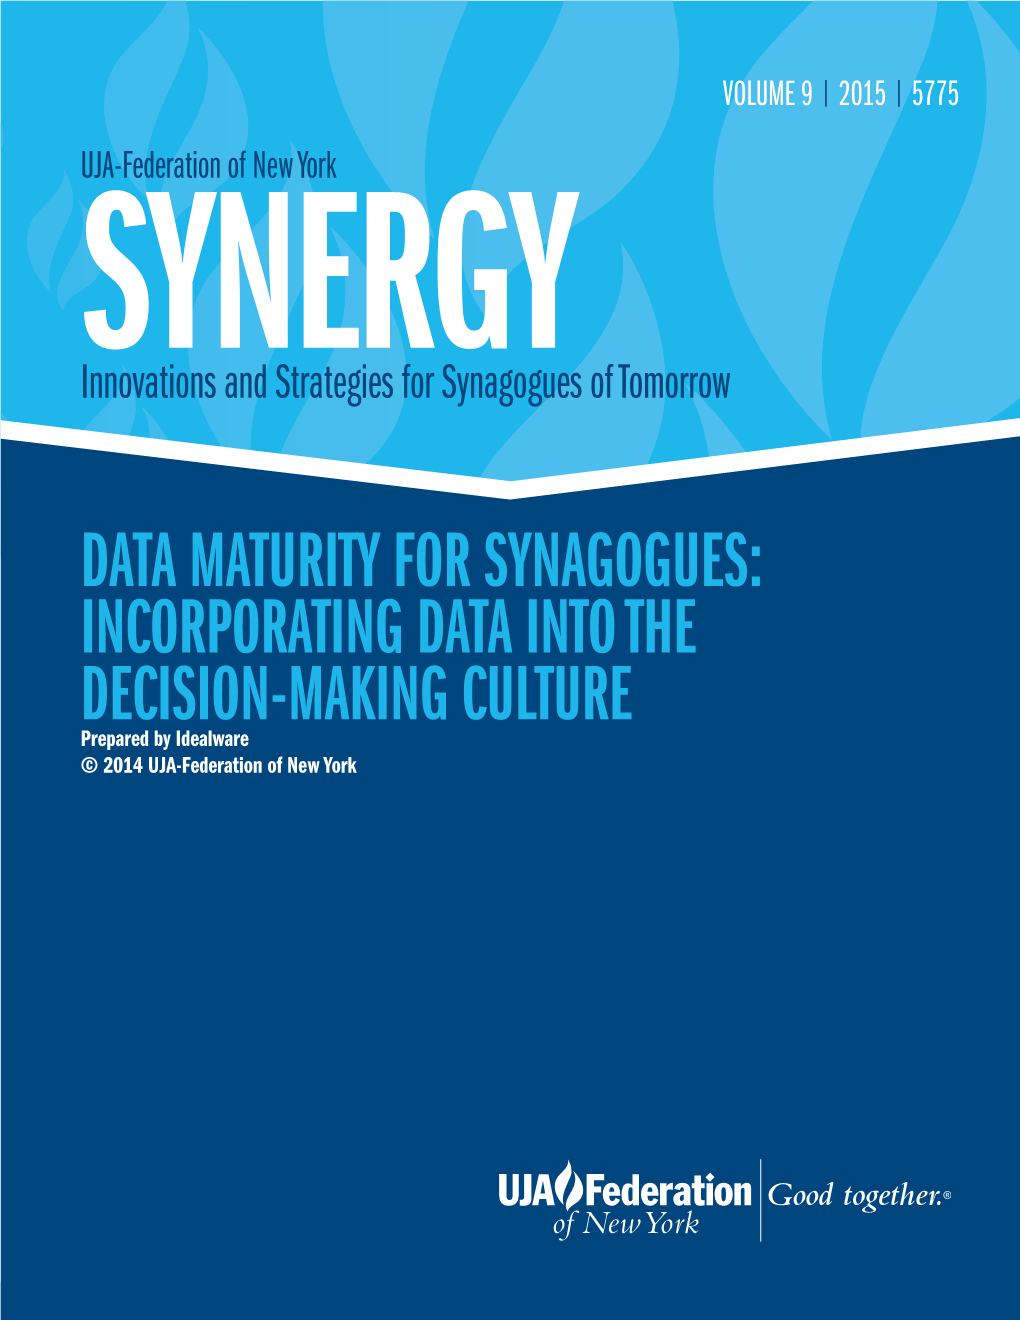 Data Maturity for Synagogues: Incorporating Data Into the Decision-Making Culture Prepared by Idealware © 2014 UJA-Federation of New York